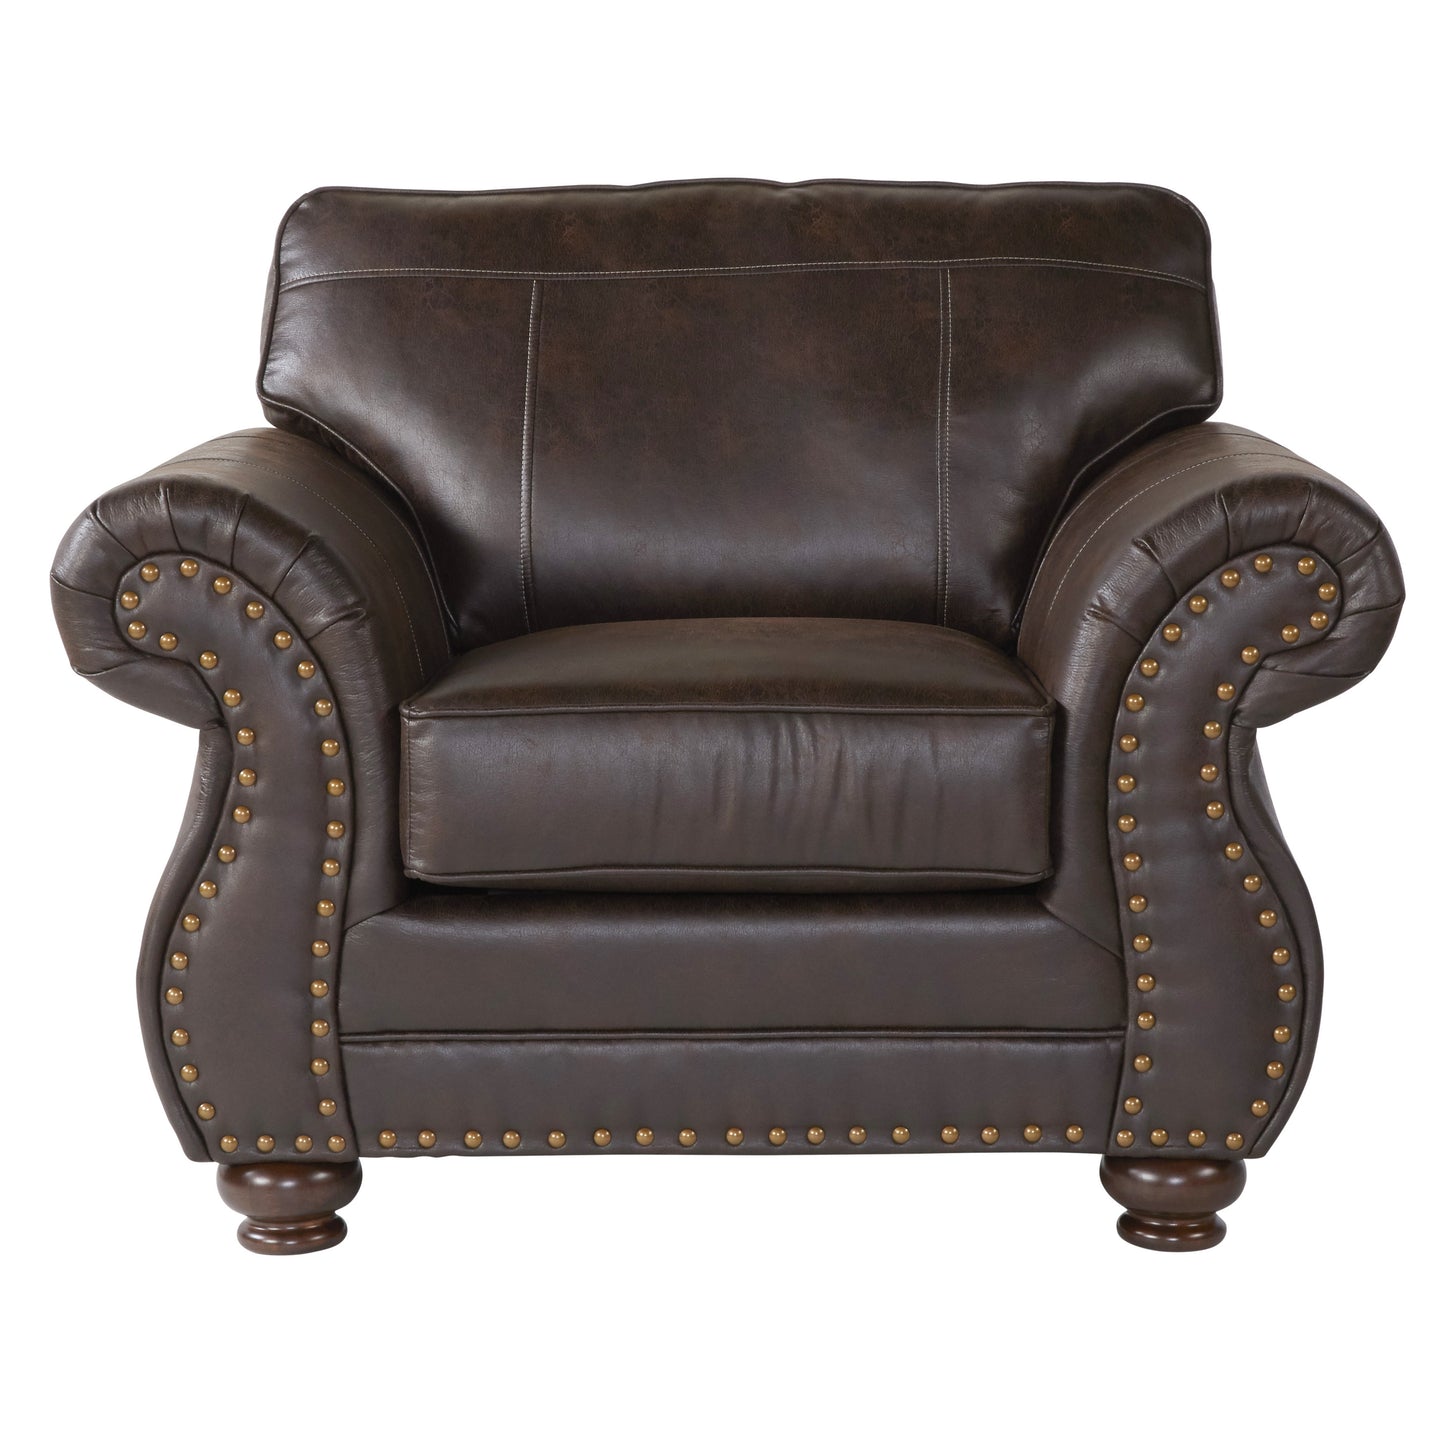 Leinster Faux Leather Upholstered Nailhead Chair in Espresso